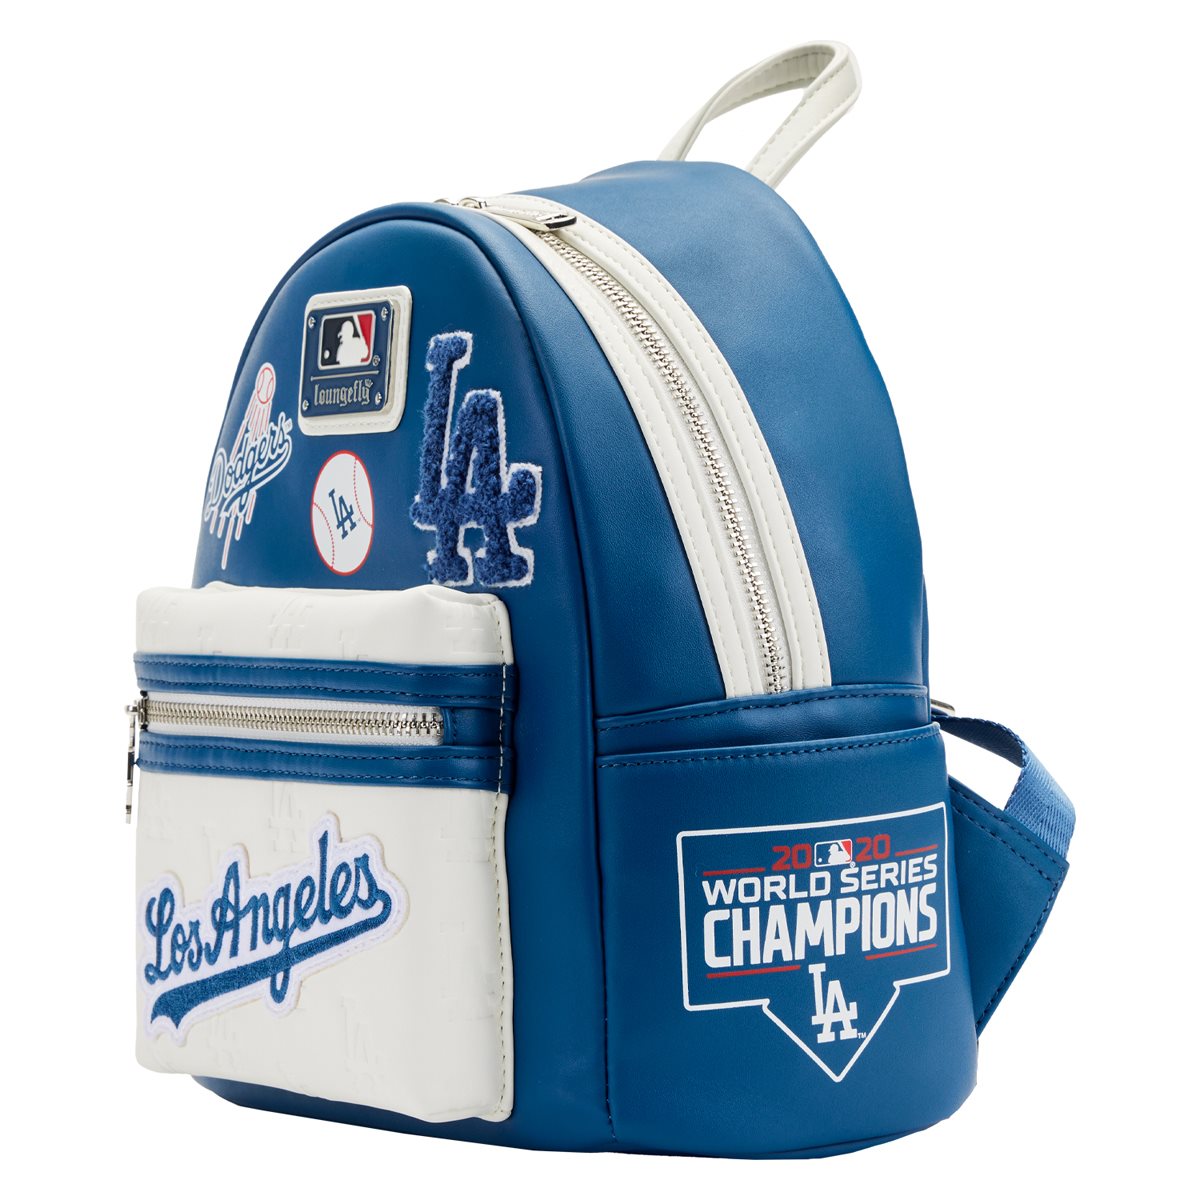 Buy MLB LA Dodgers Stadium Crossbody Bag with Pouch at Loungefly.